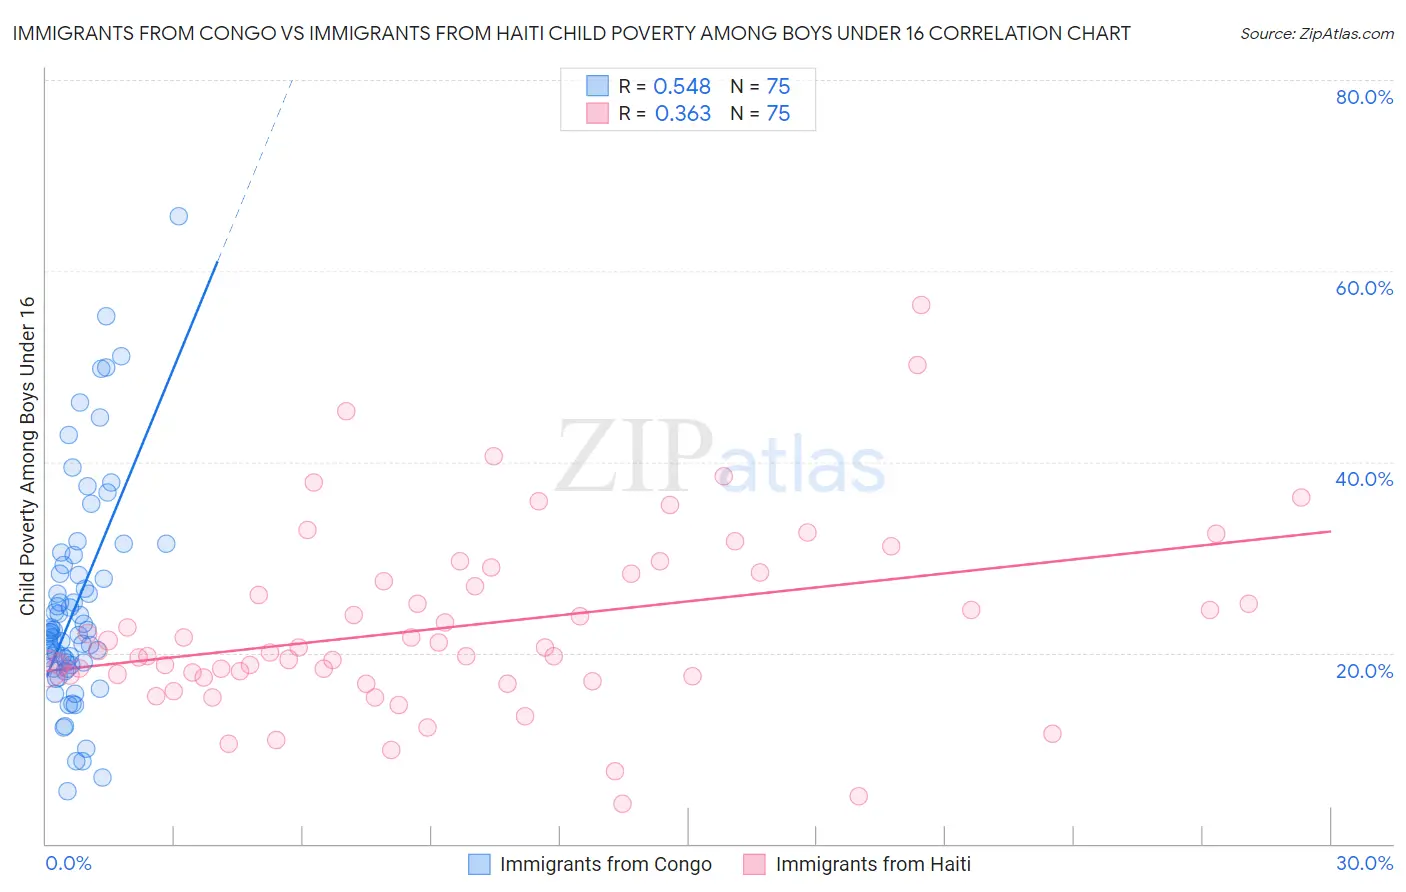 Immigrants from Congo vs Immigrants from Haiti Child Poverty Among Boys Under 16